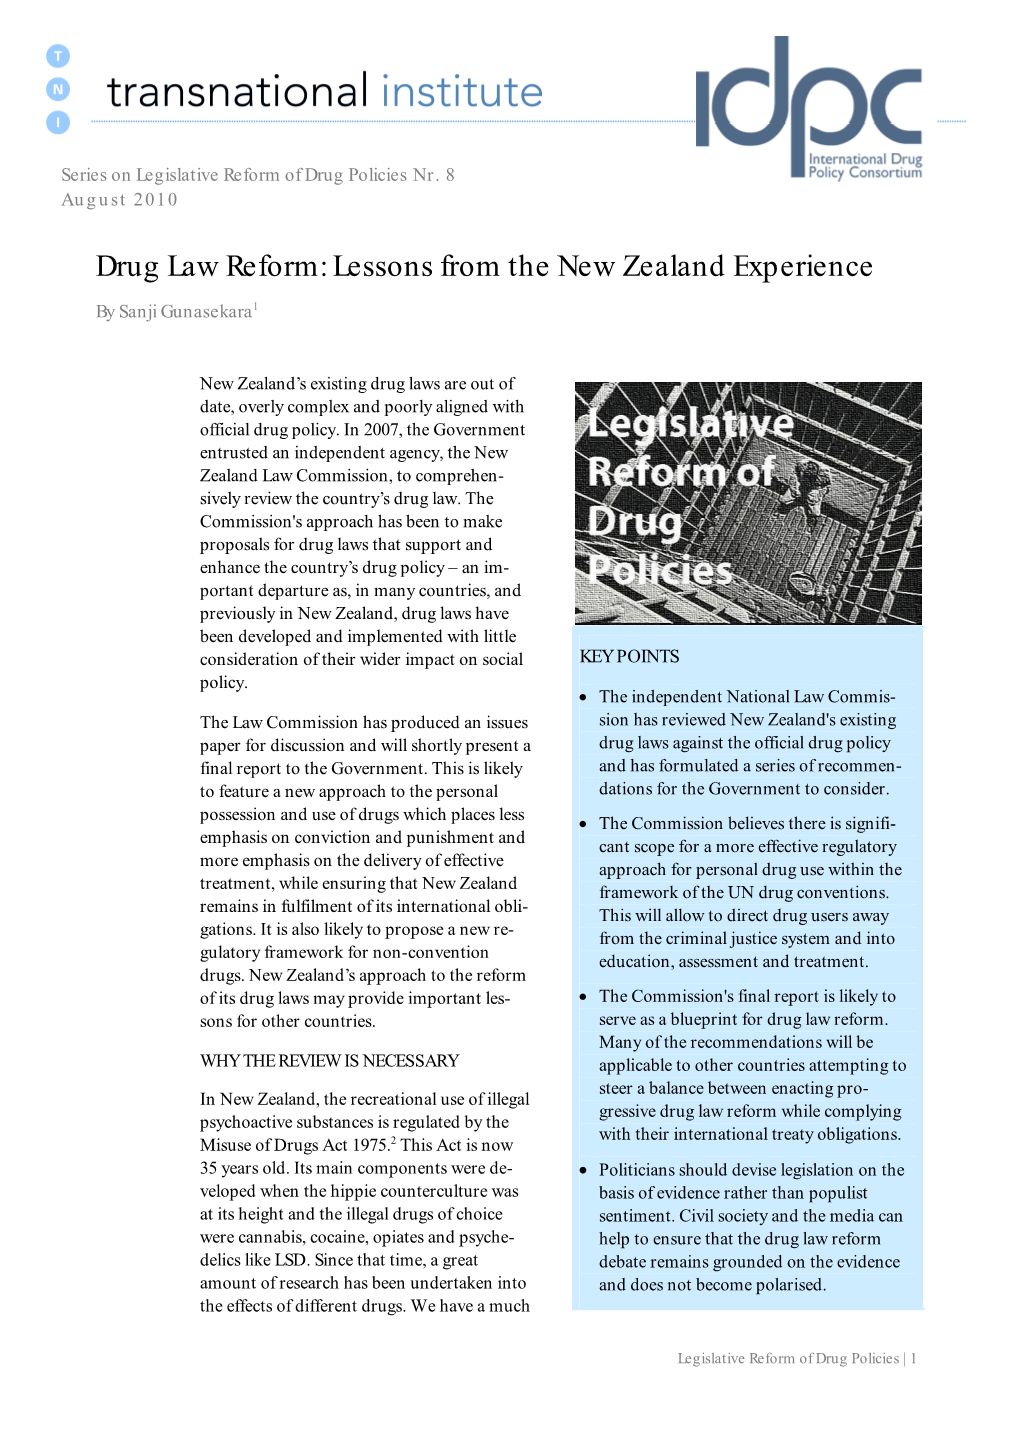 Drug Law Reform: Lessons from the New Zealand Experience